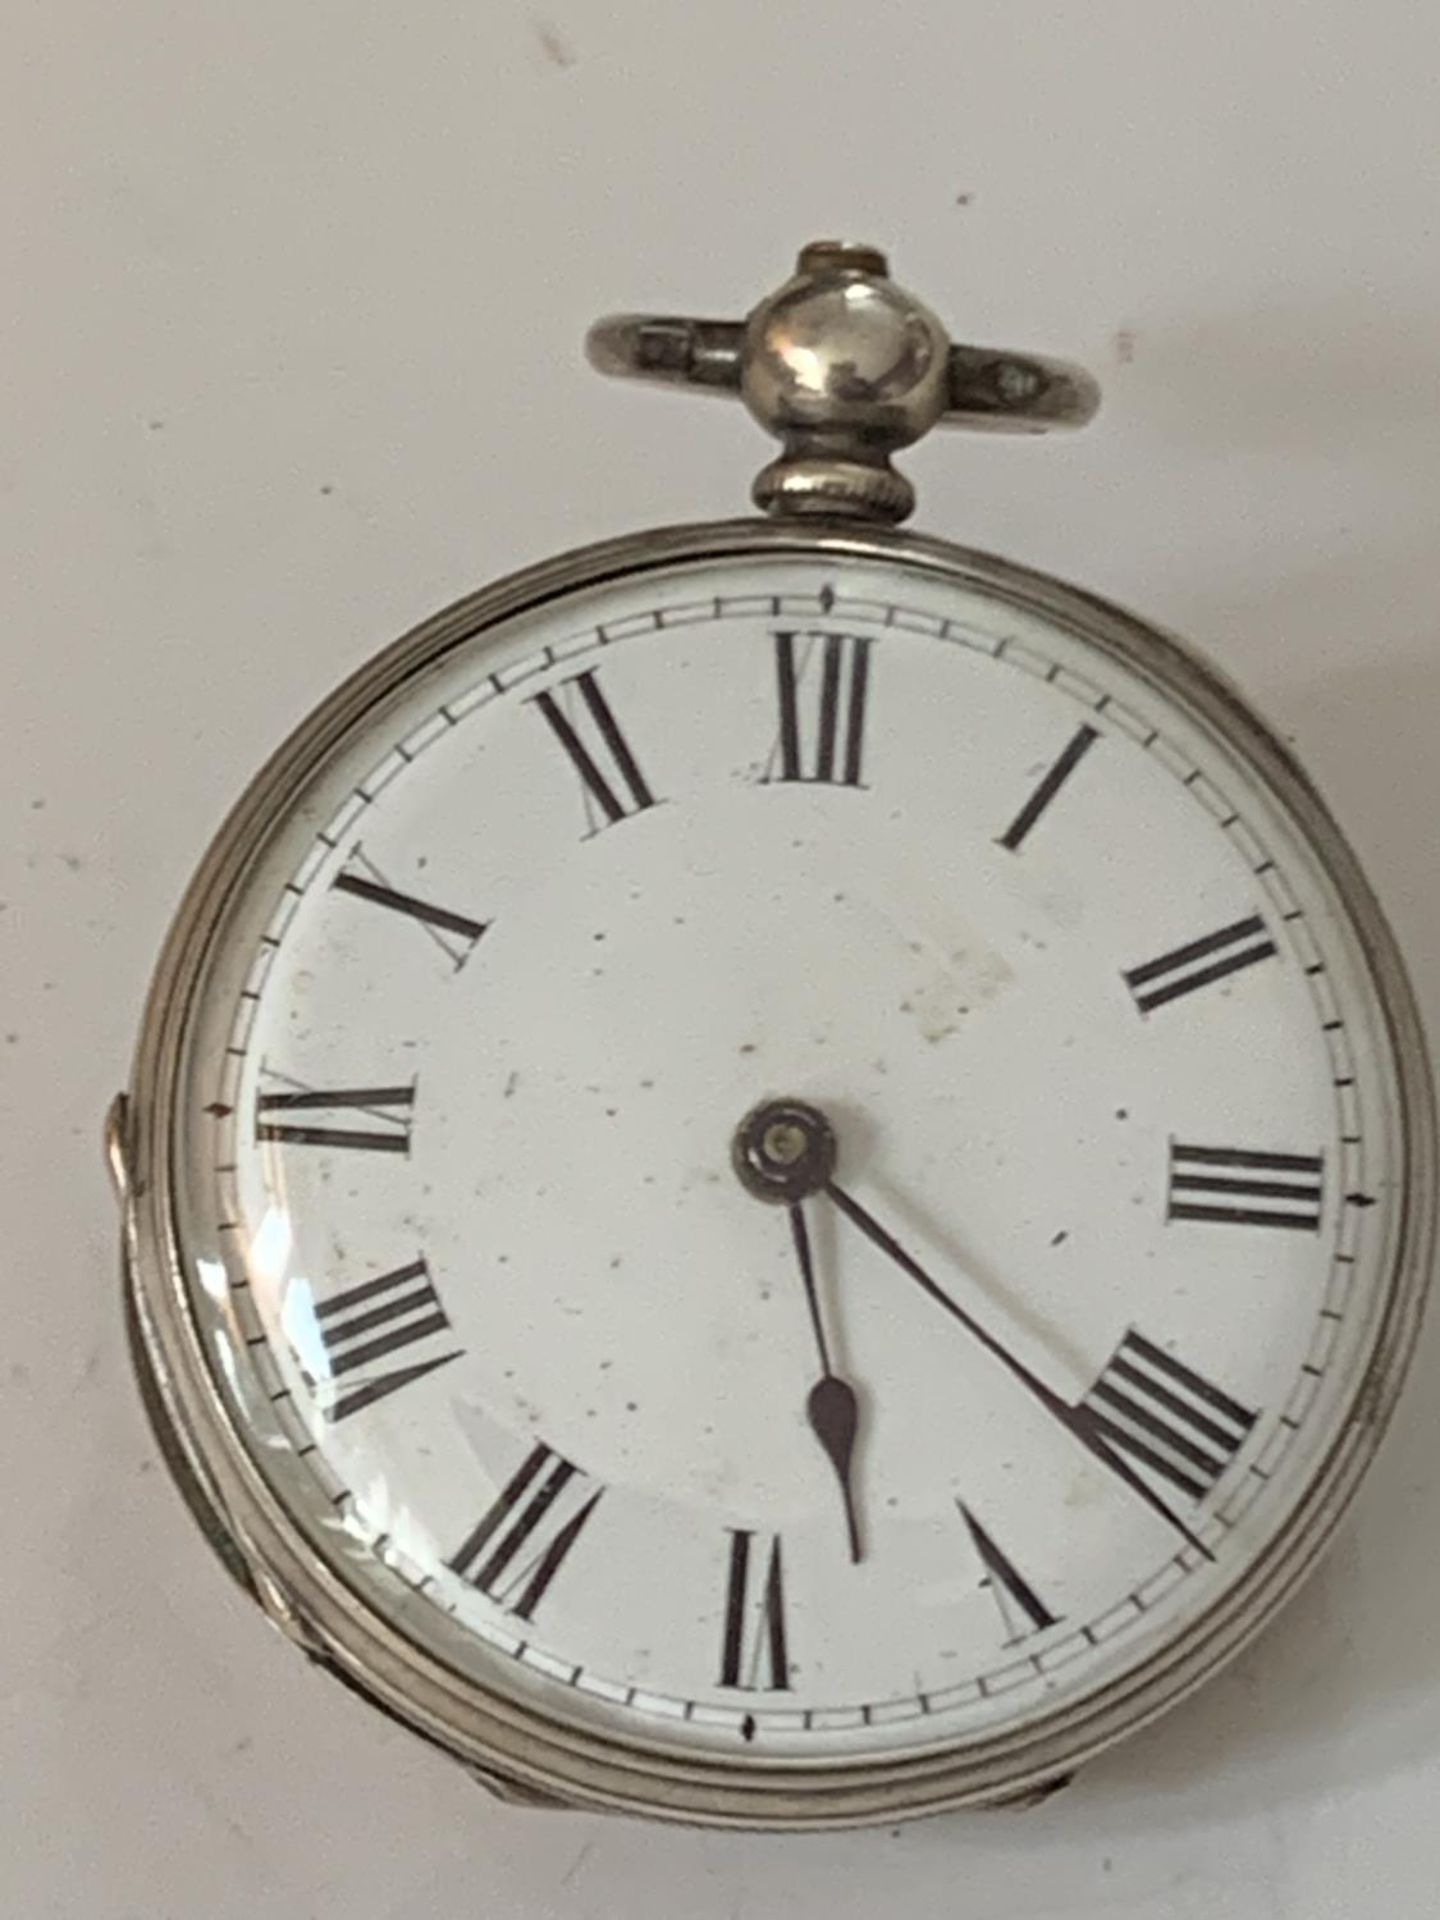 A MARKED FINE SILVER POCKET WATCH WITH WHITE ENAMEL FACE AND ROMAN NUMERALS